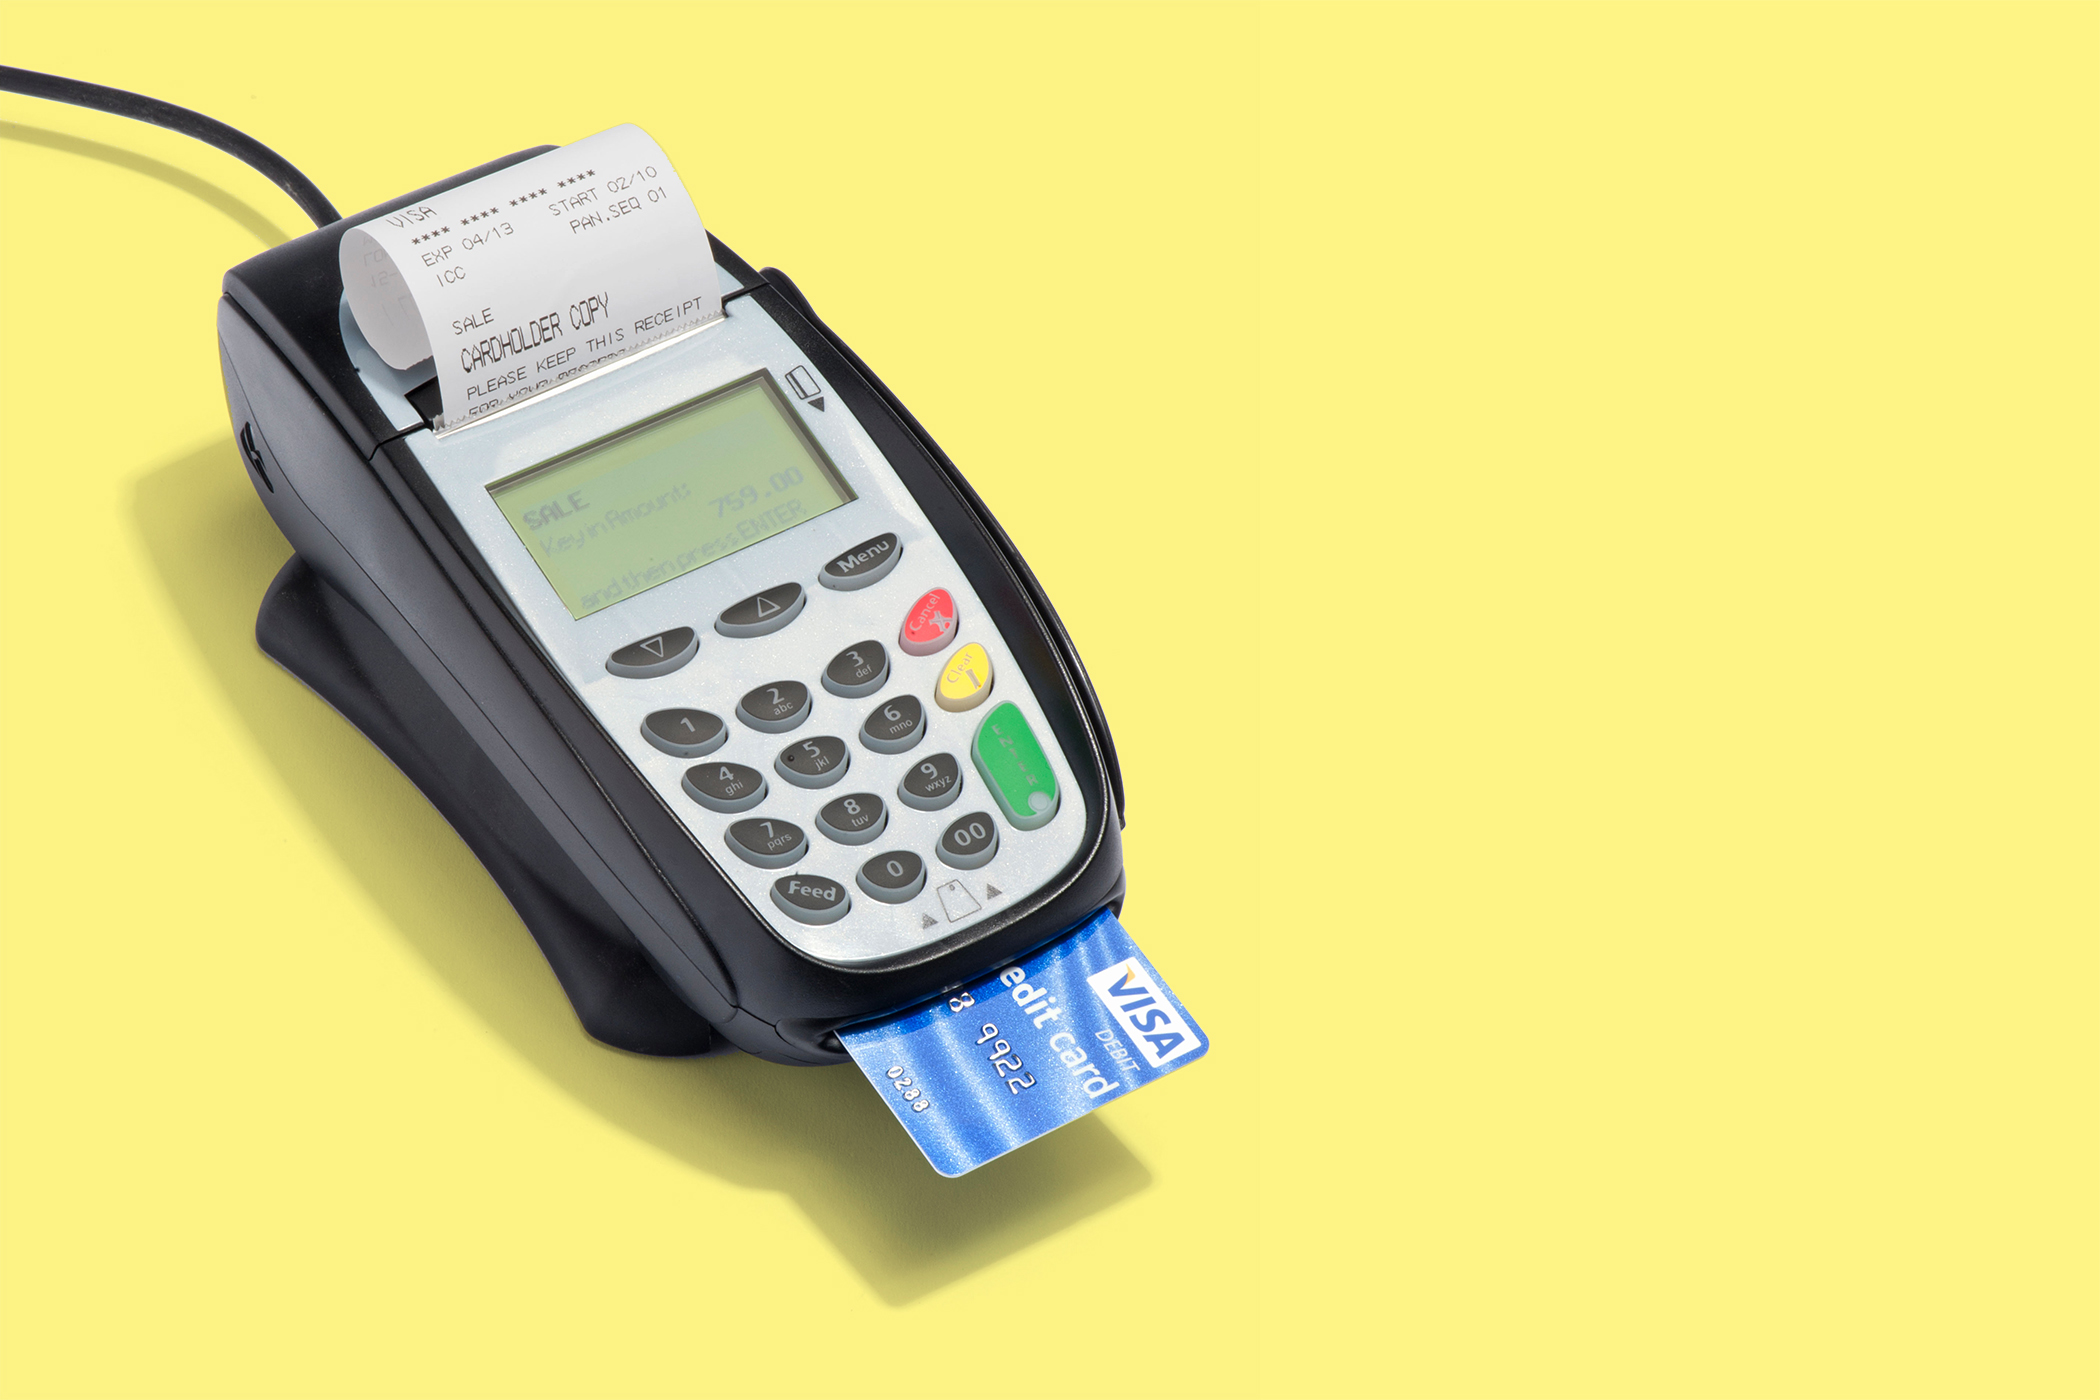 7 Things You Should Know About New EMV Chip Credit Cards